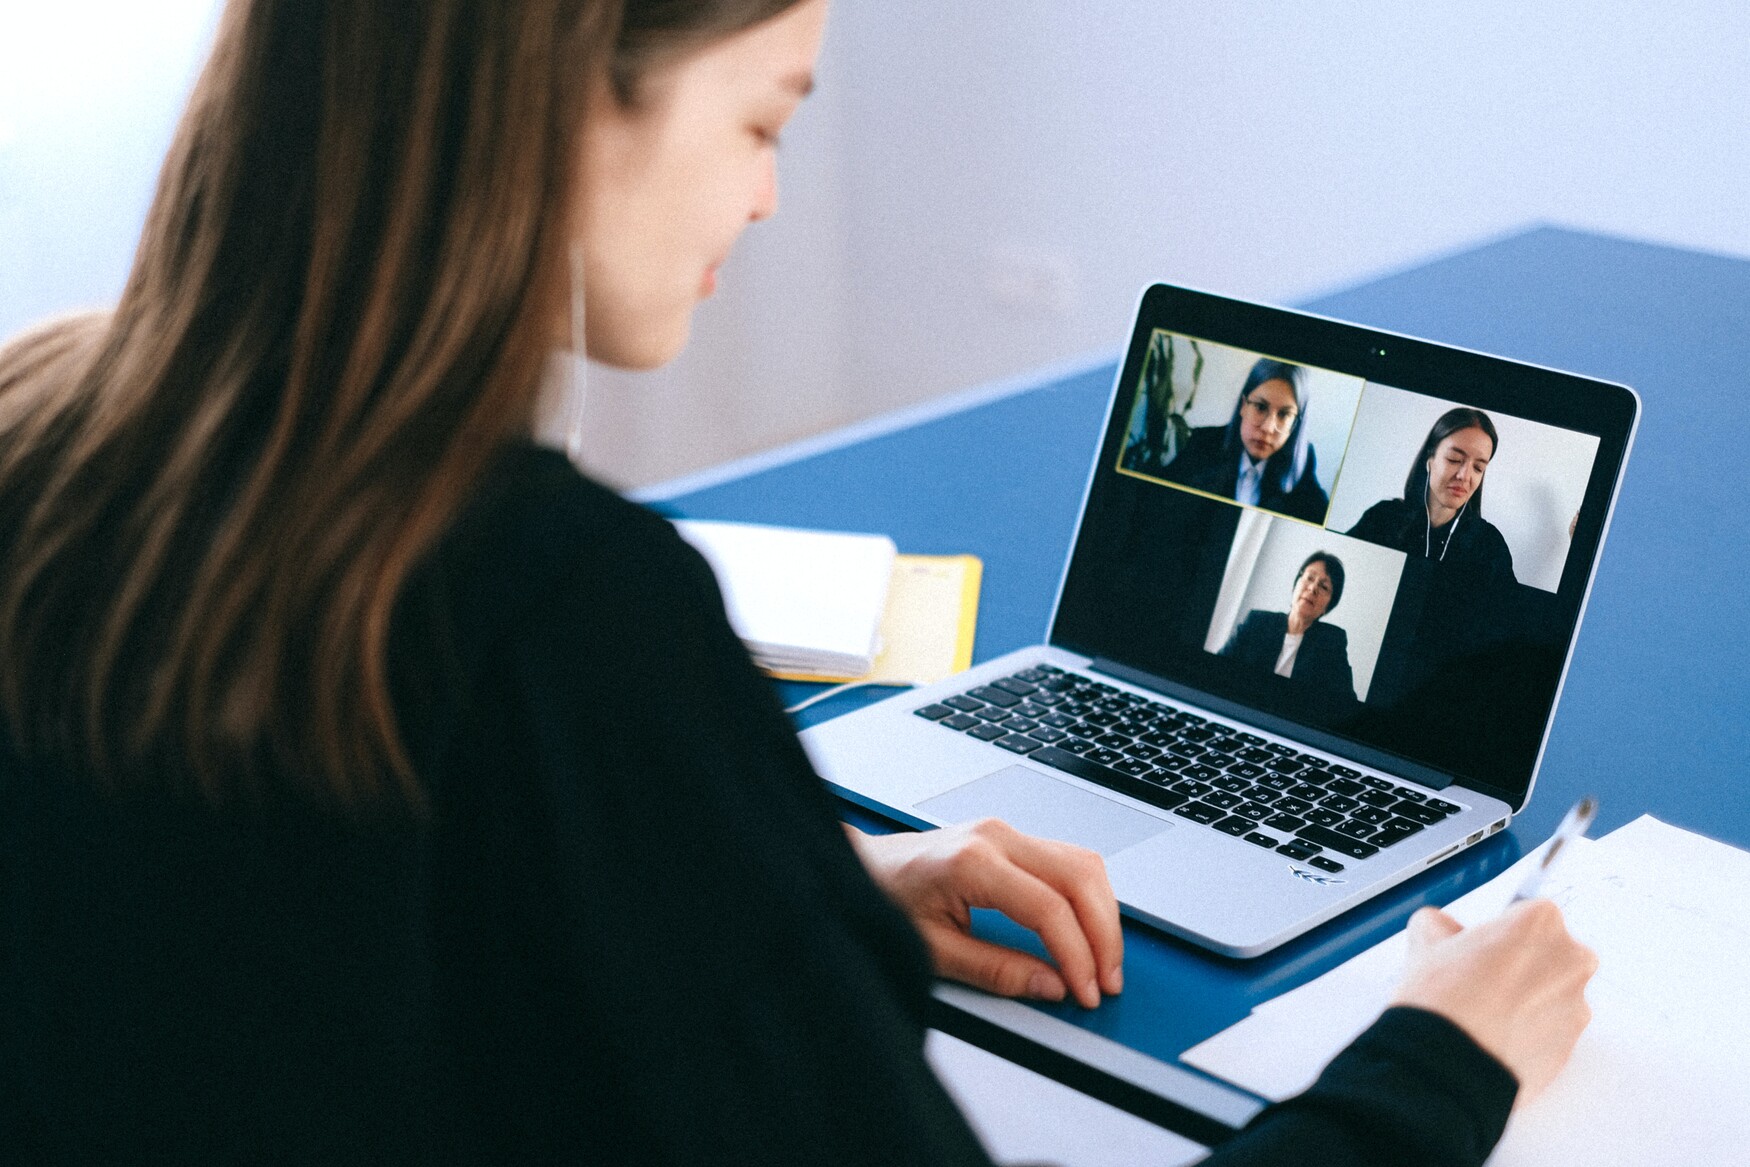 Woman chatting with three other women through a virtual meeting